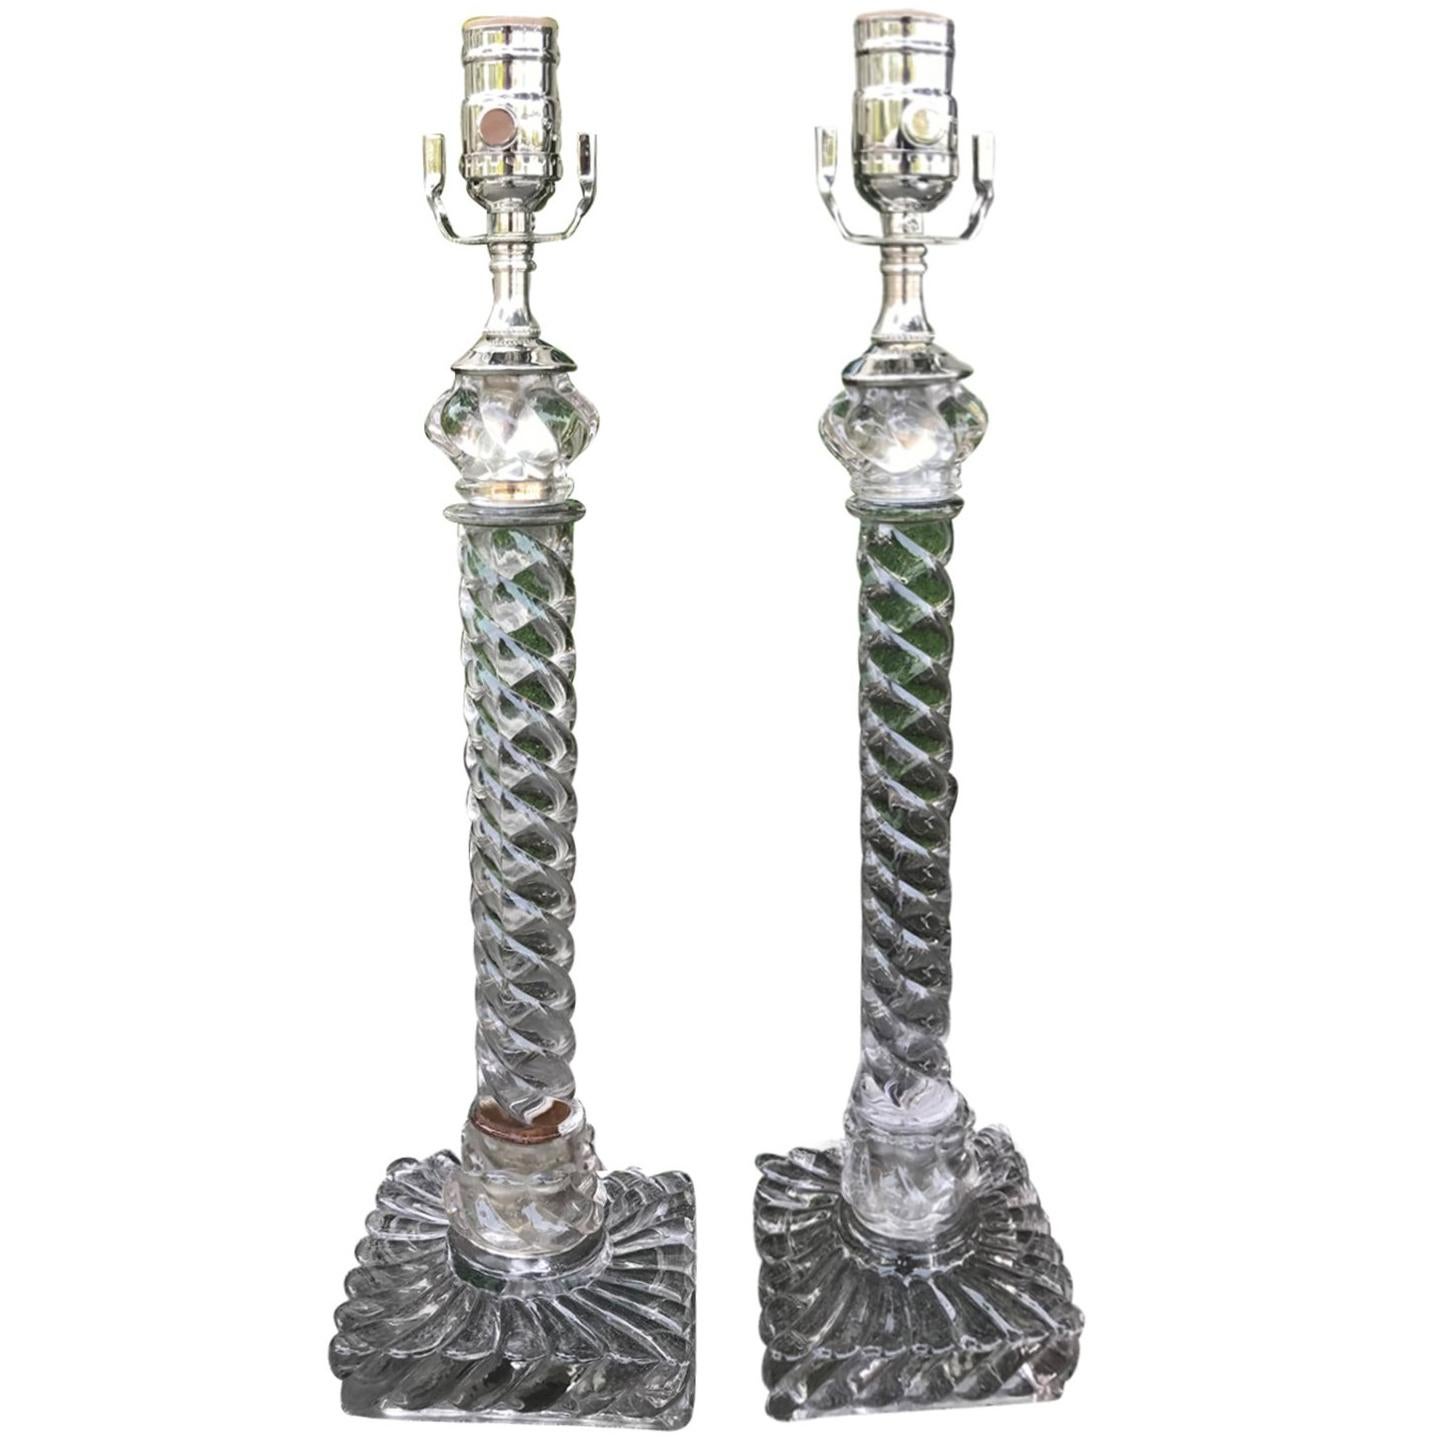 Pair of 19th Century Crystal Twist Lamps Attributed to Baccarat